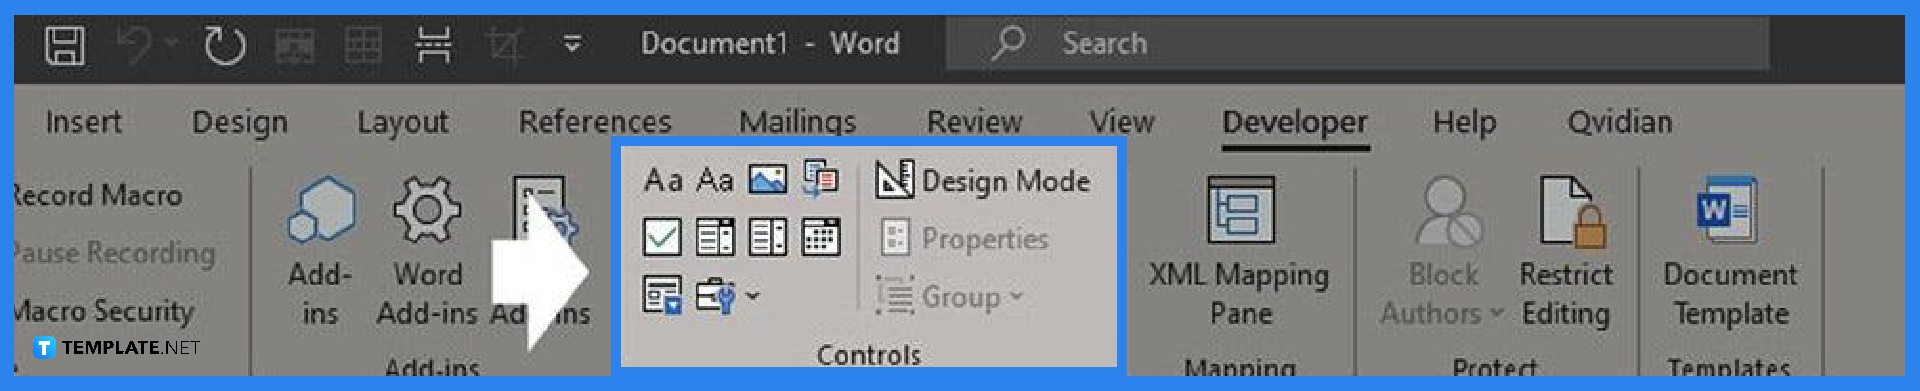 How To Create Fillable Forms in Microsoft Word - Step 2